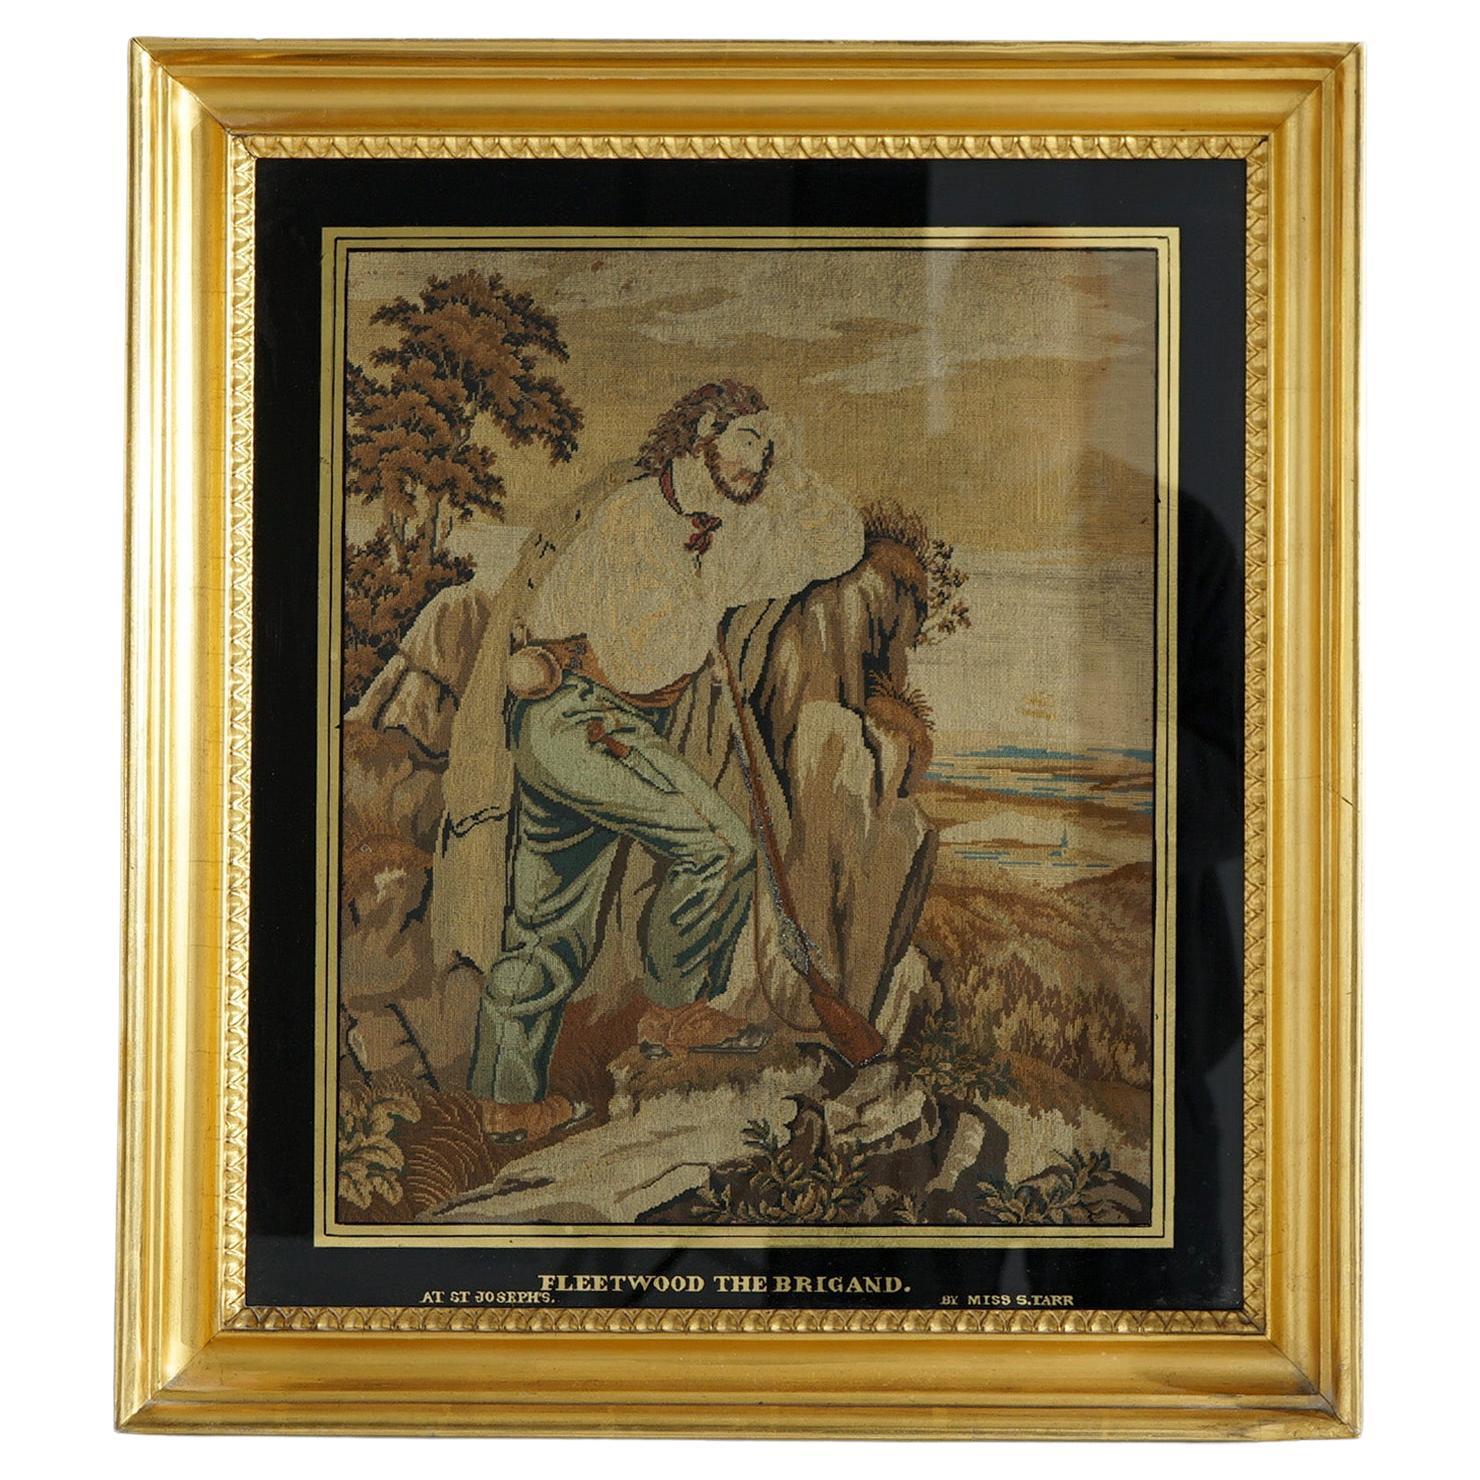 Antique Needlework "Fleetwood The Brigand At St. Joseph’s" by Miss S. Tarr c1840 For Sale